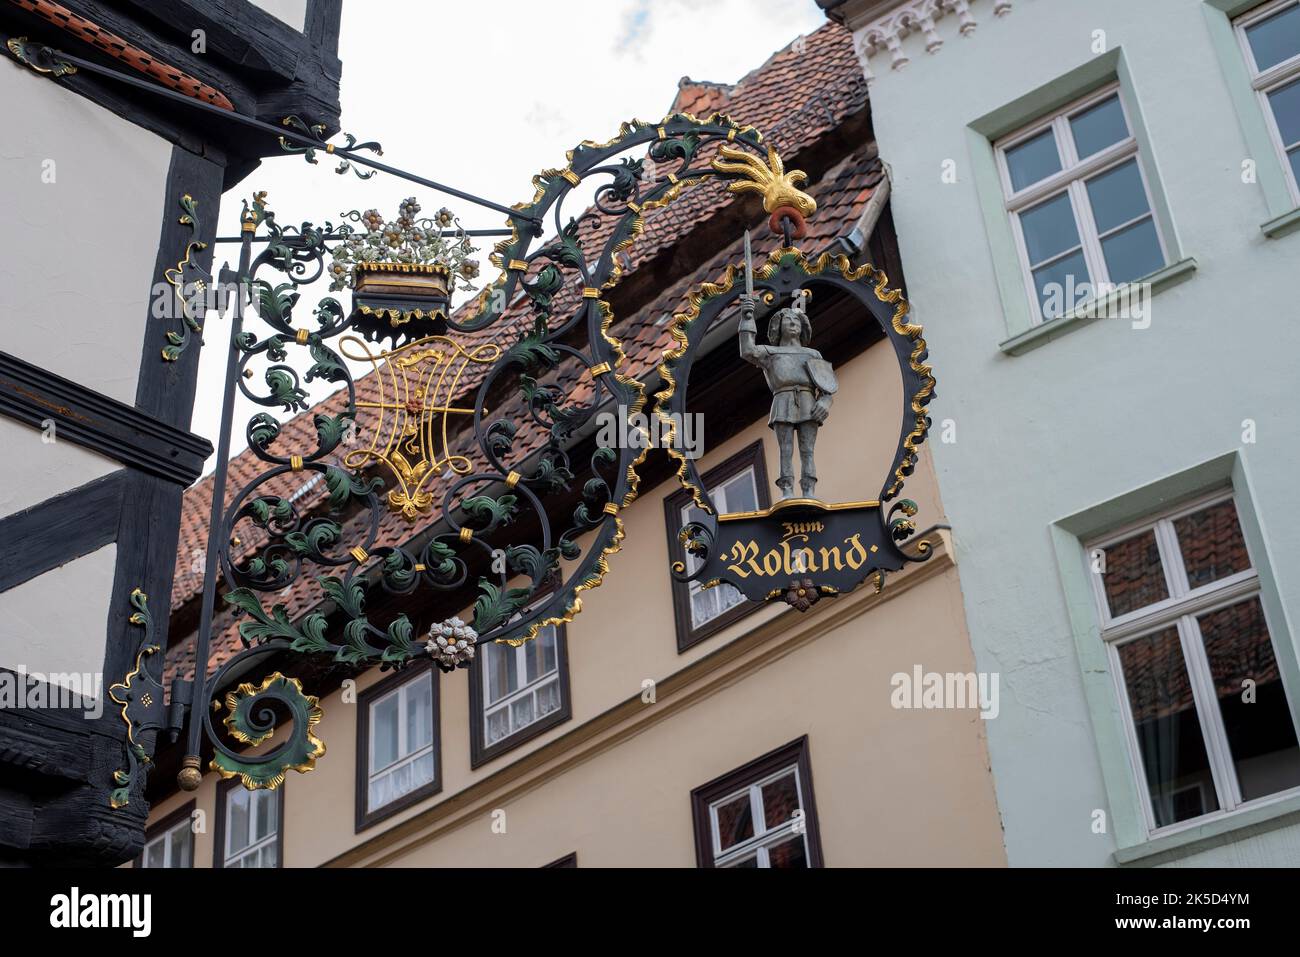 Nose sign of a cafe, Unesco World Heritage town of Quedlinburg, Saxony-Anhalt, Germany Stock Photo